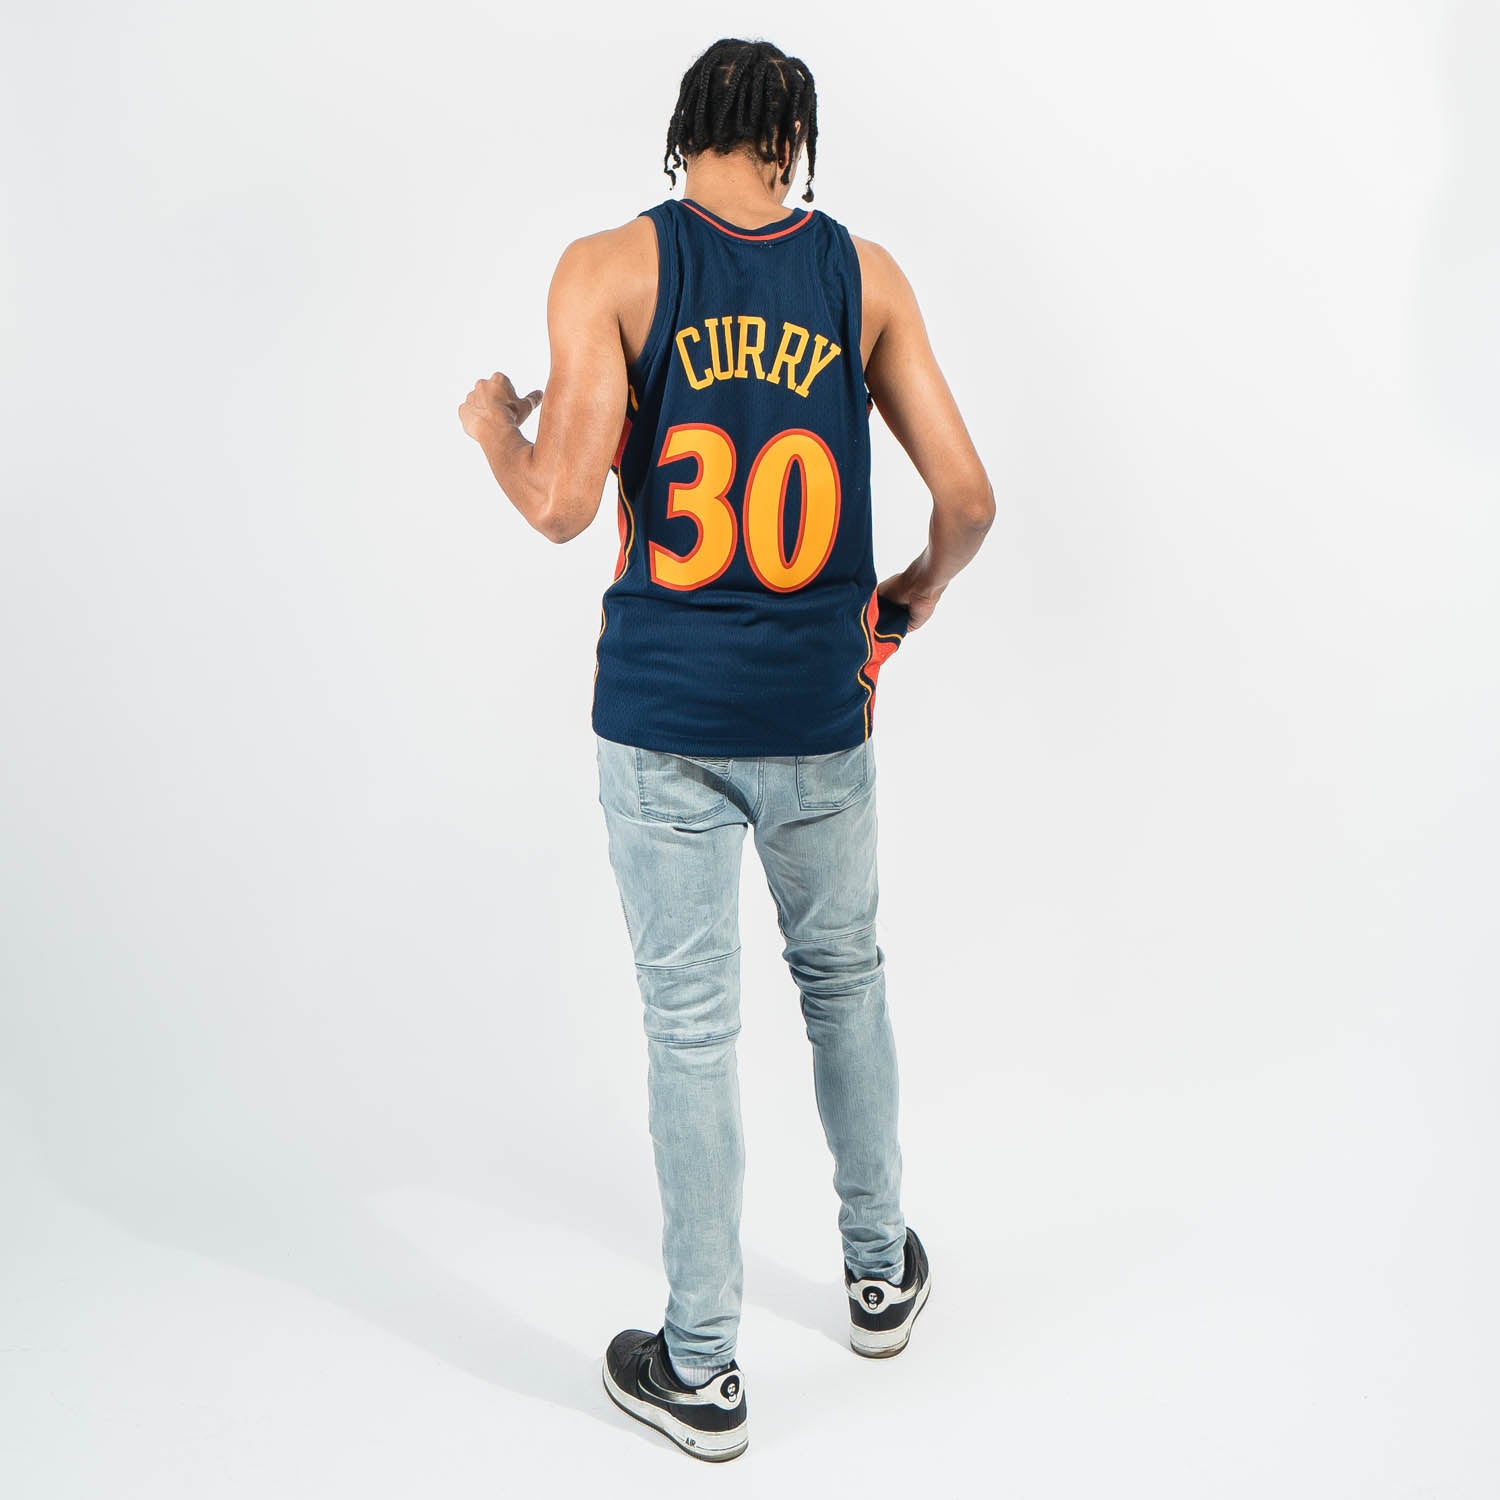 Pin by fjpt on curry-30  Golden state warriors, Stephen curry jersey,  Jersey